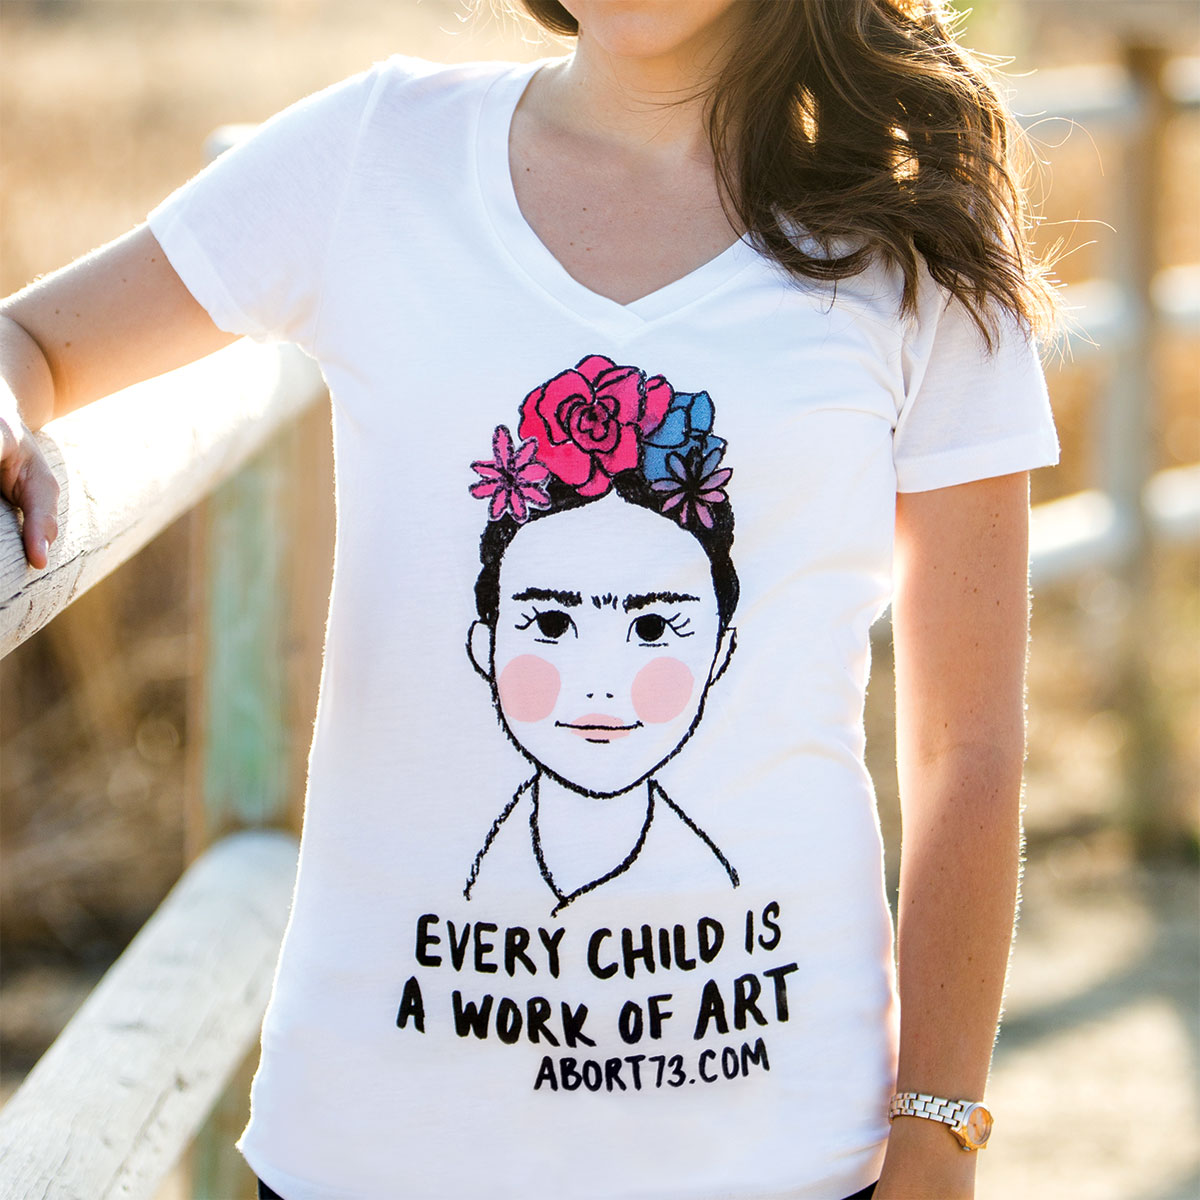 Every Child is a Work of Art (Abort73 Girls V-neck)